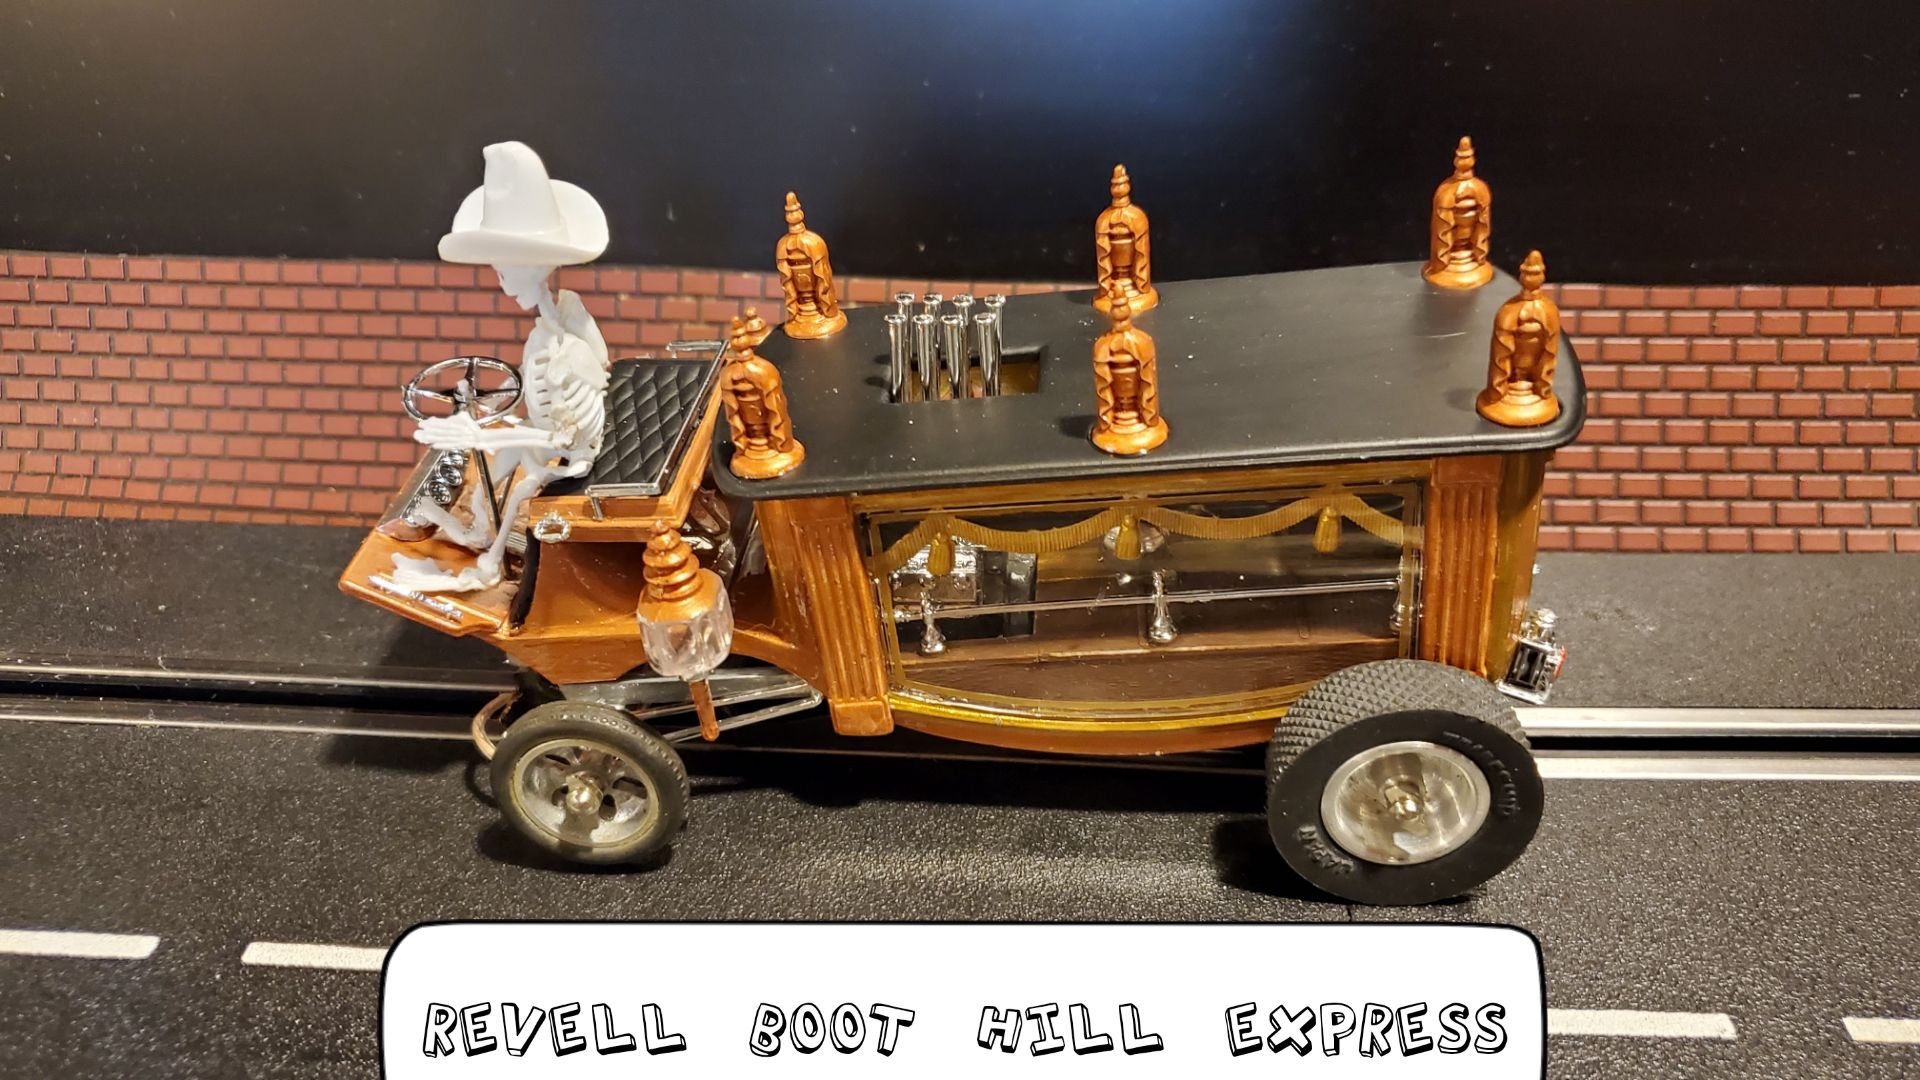 * SOLD * * -$150 Customer loyalty Sale for Joe K. ONLY, S&H includes Insurance * Revell Boot Hill Express Show Rod with Skeleton Driver Slot Car 1/24 Scale